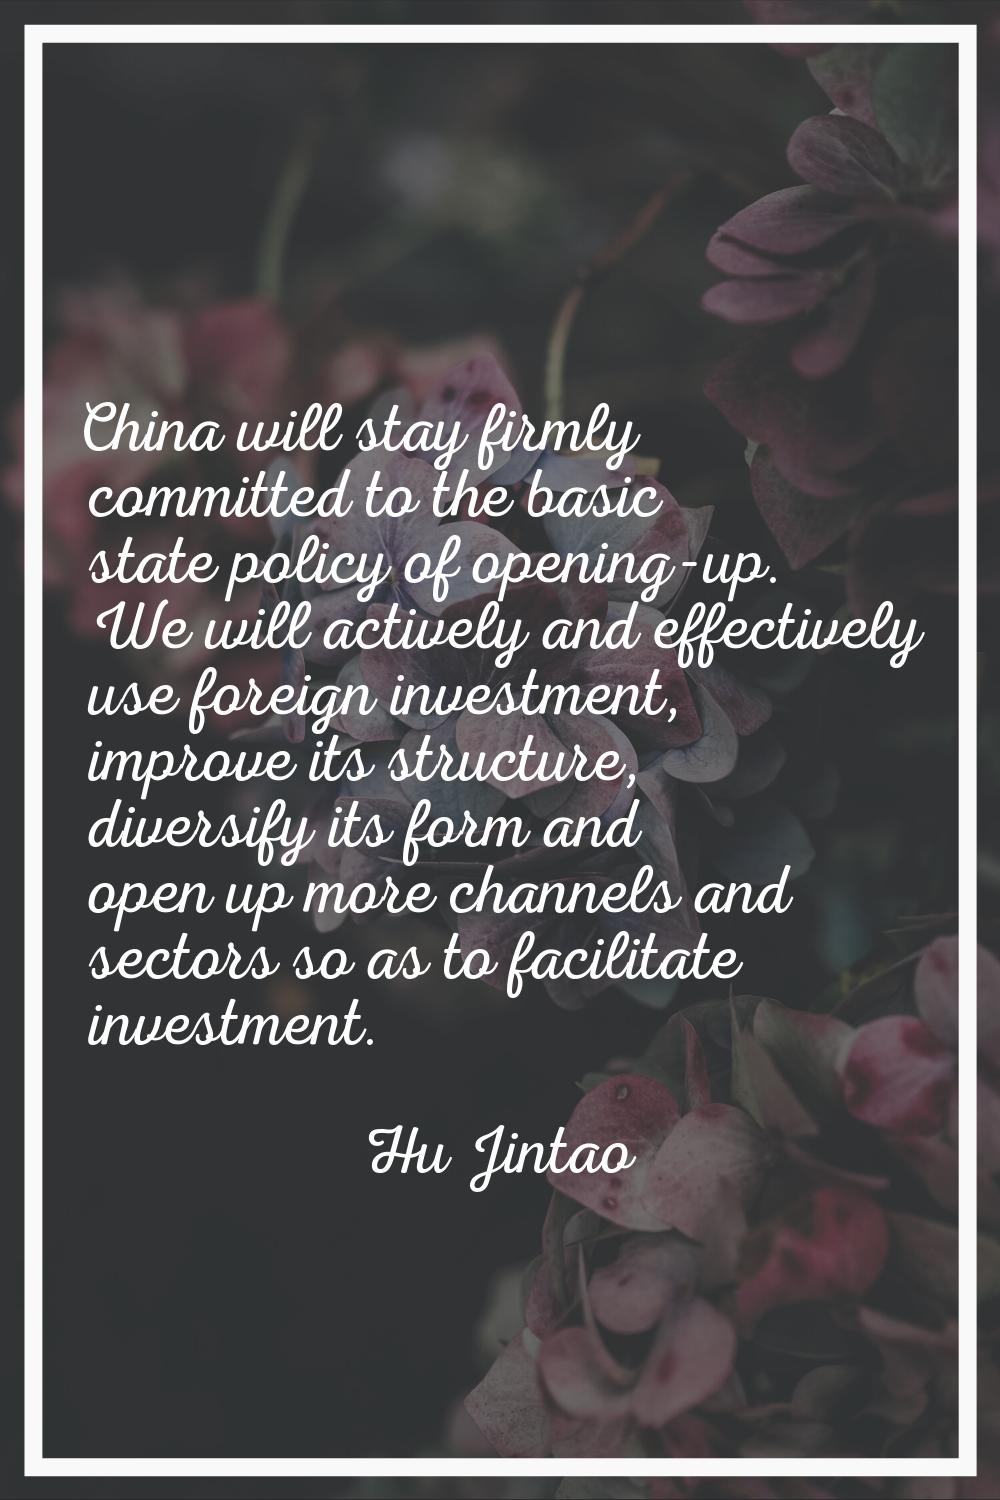 China will stay firmly committed to the basic state policy of opening-up. We will actively and effe